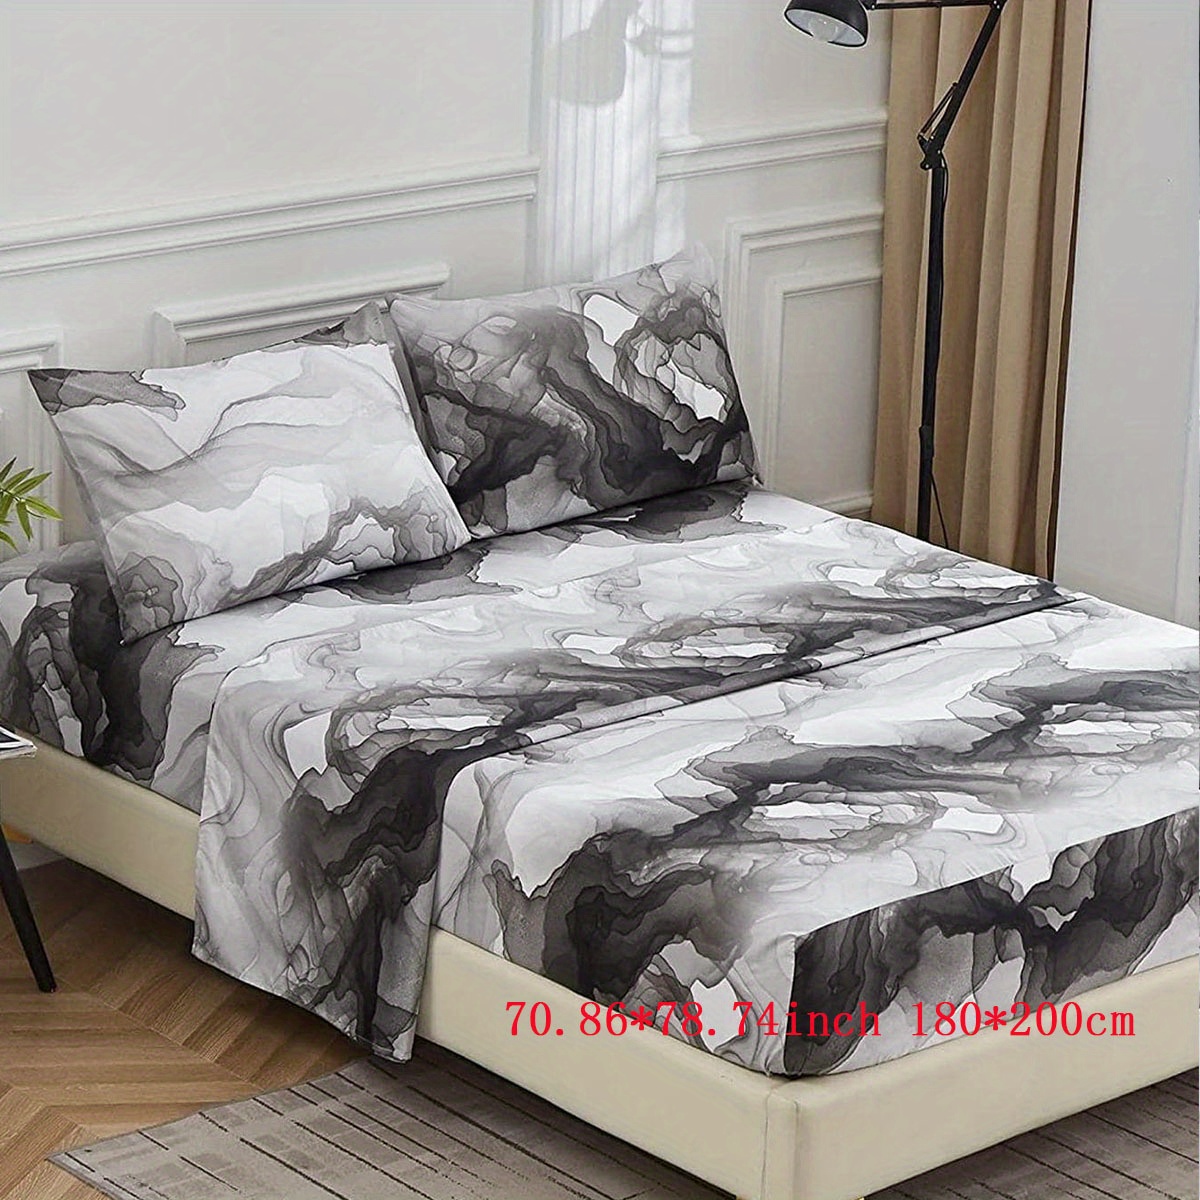 4pcs soft and breathable ink fluid painting bedding set for bedroom guest room hotel and dorm includes 1 flat sheet 1 fitted sheet and 2 pillowcases core free